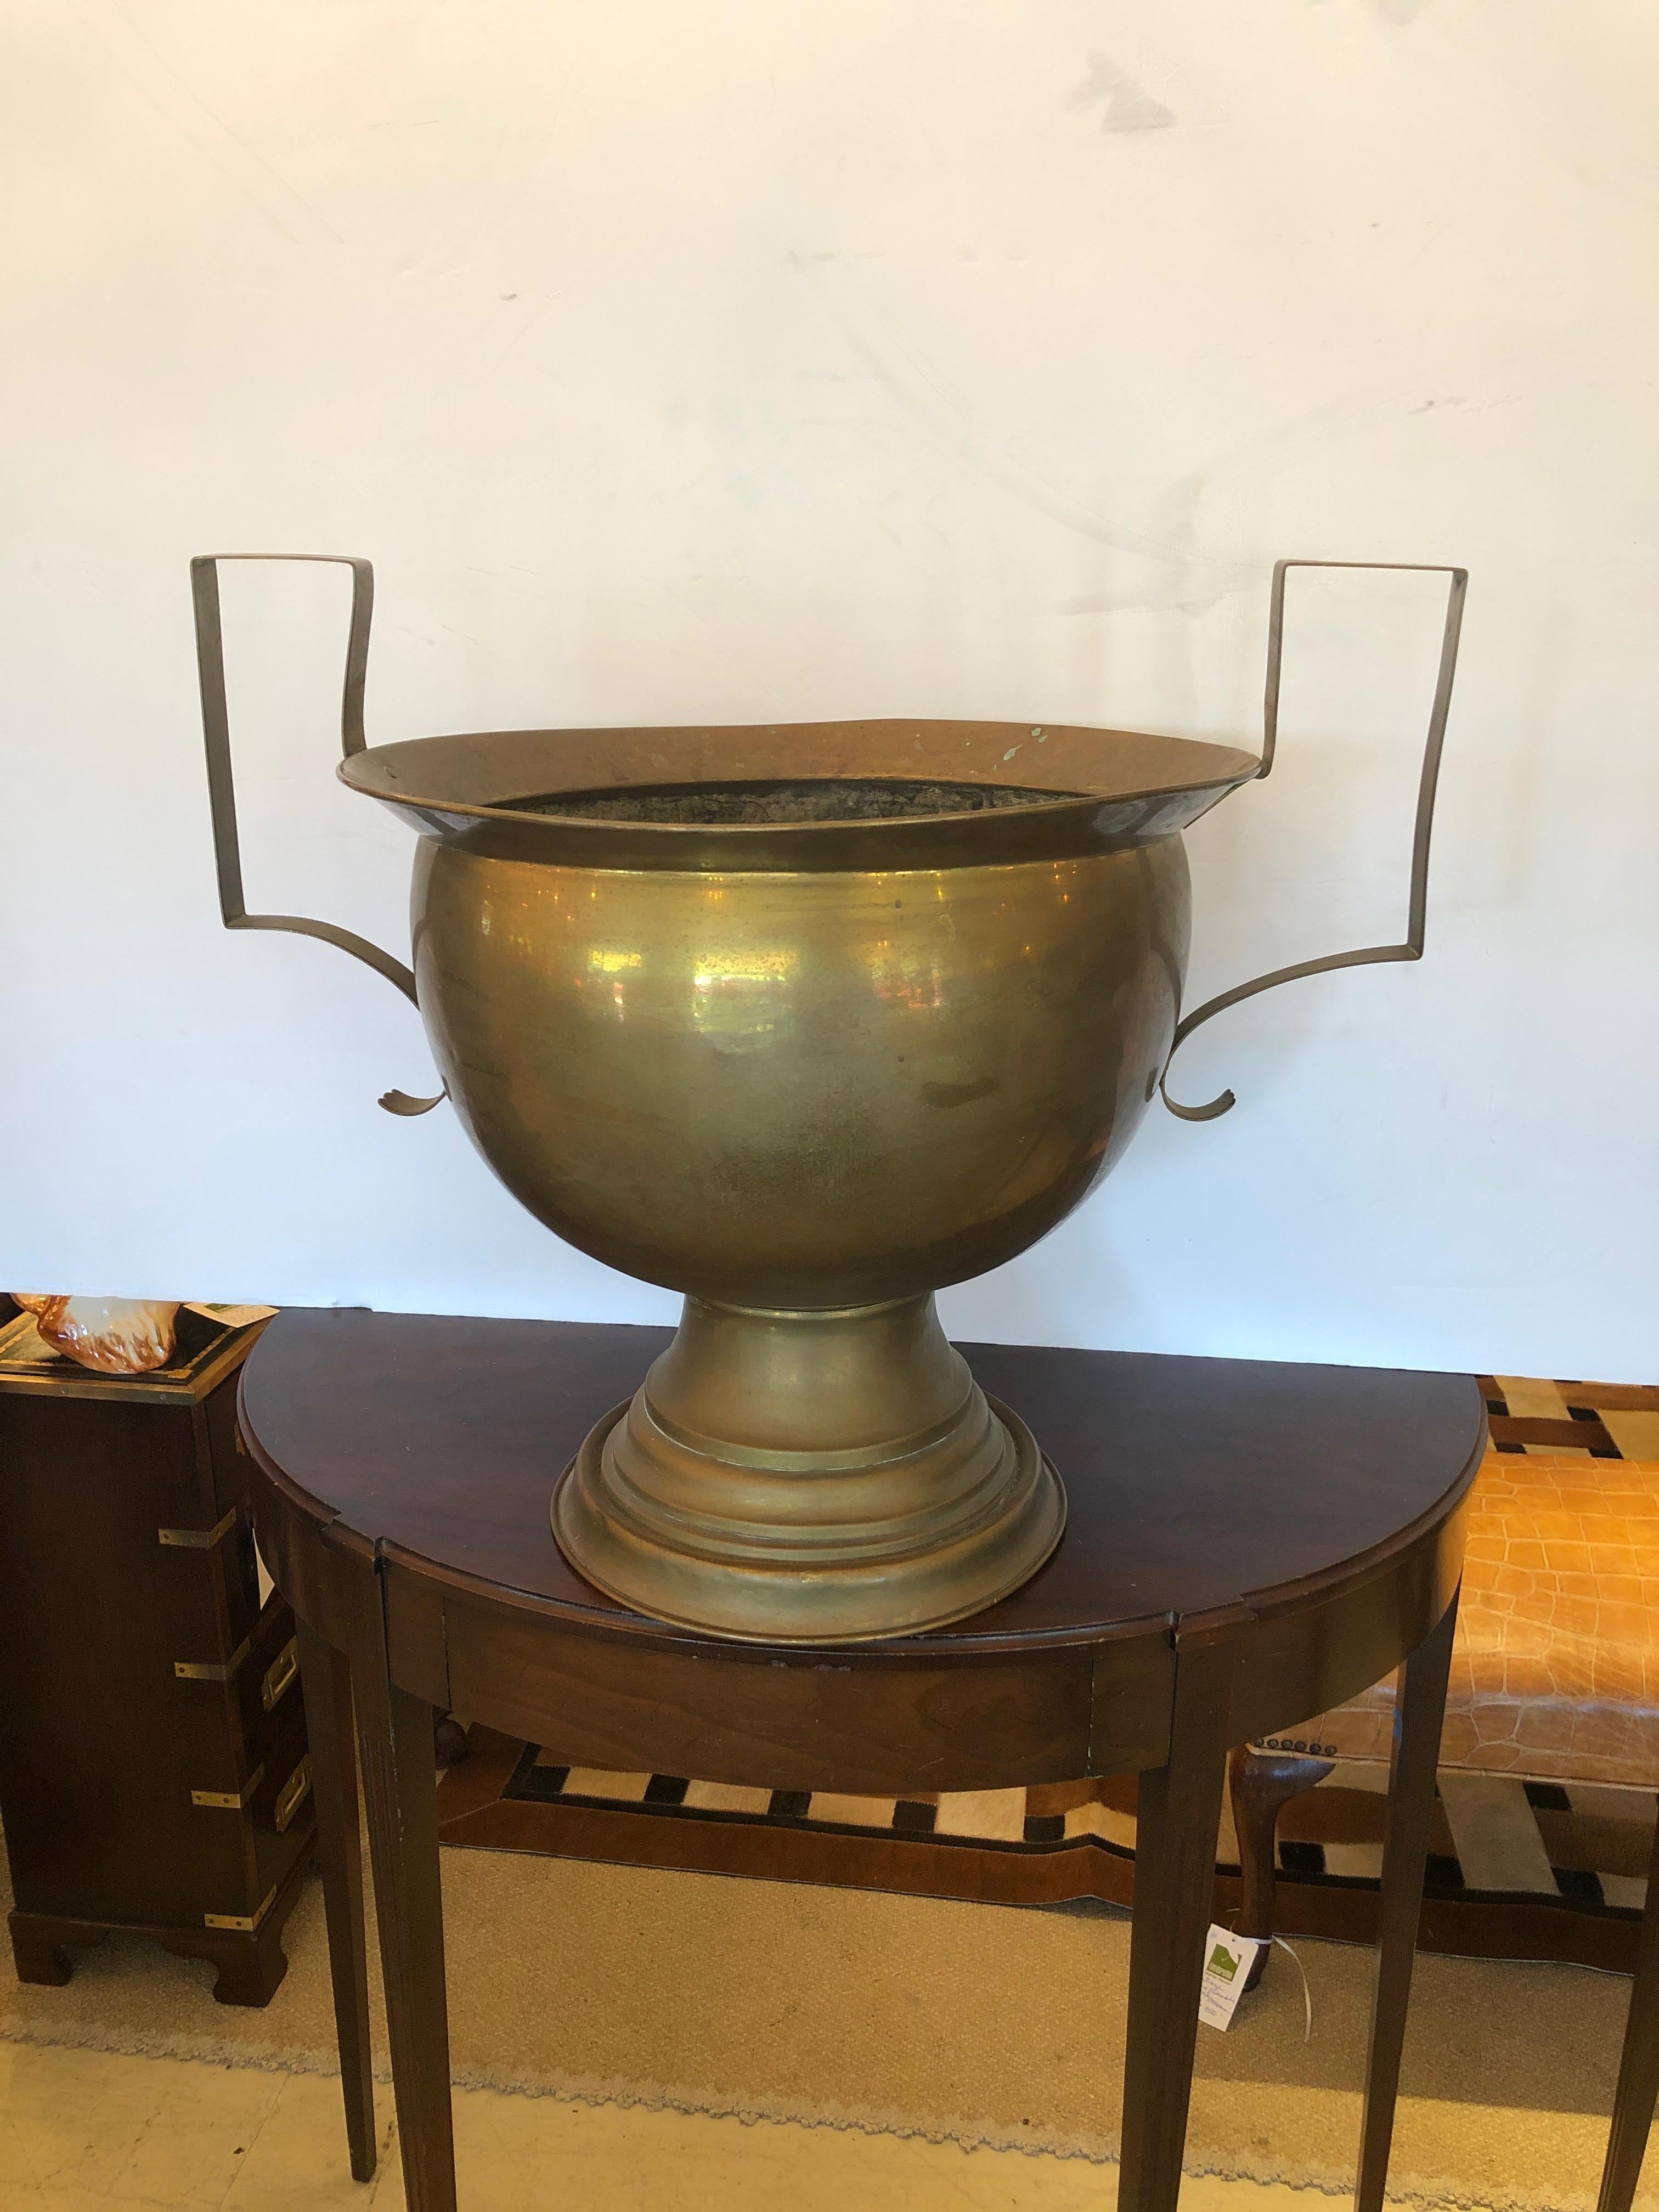 Eye catchingly large in scale and Classic pair of brass urns, planters, flowerpots or centerpieces, having handsome bases and neoclassical simple shaped handles with copper rivets.

Measures: 18 H to top of urn
22 H to top of handles.